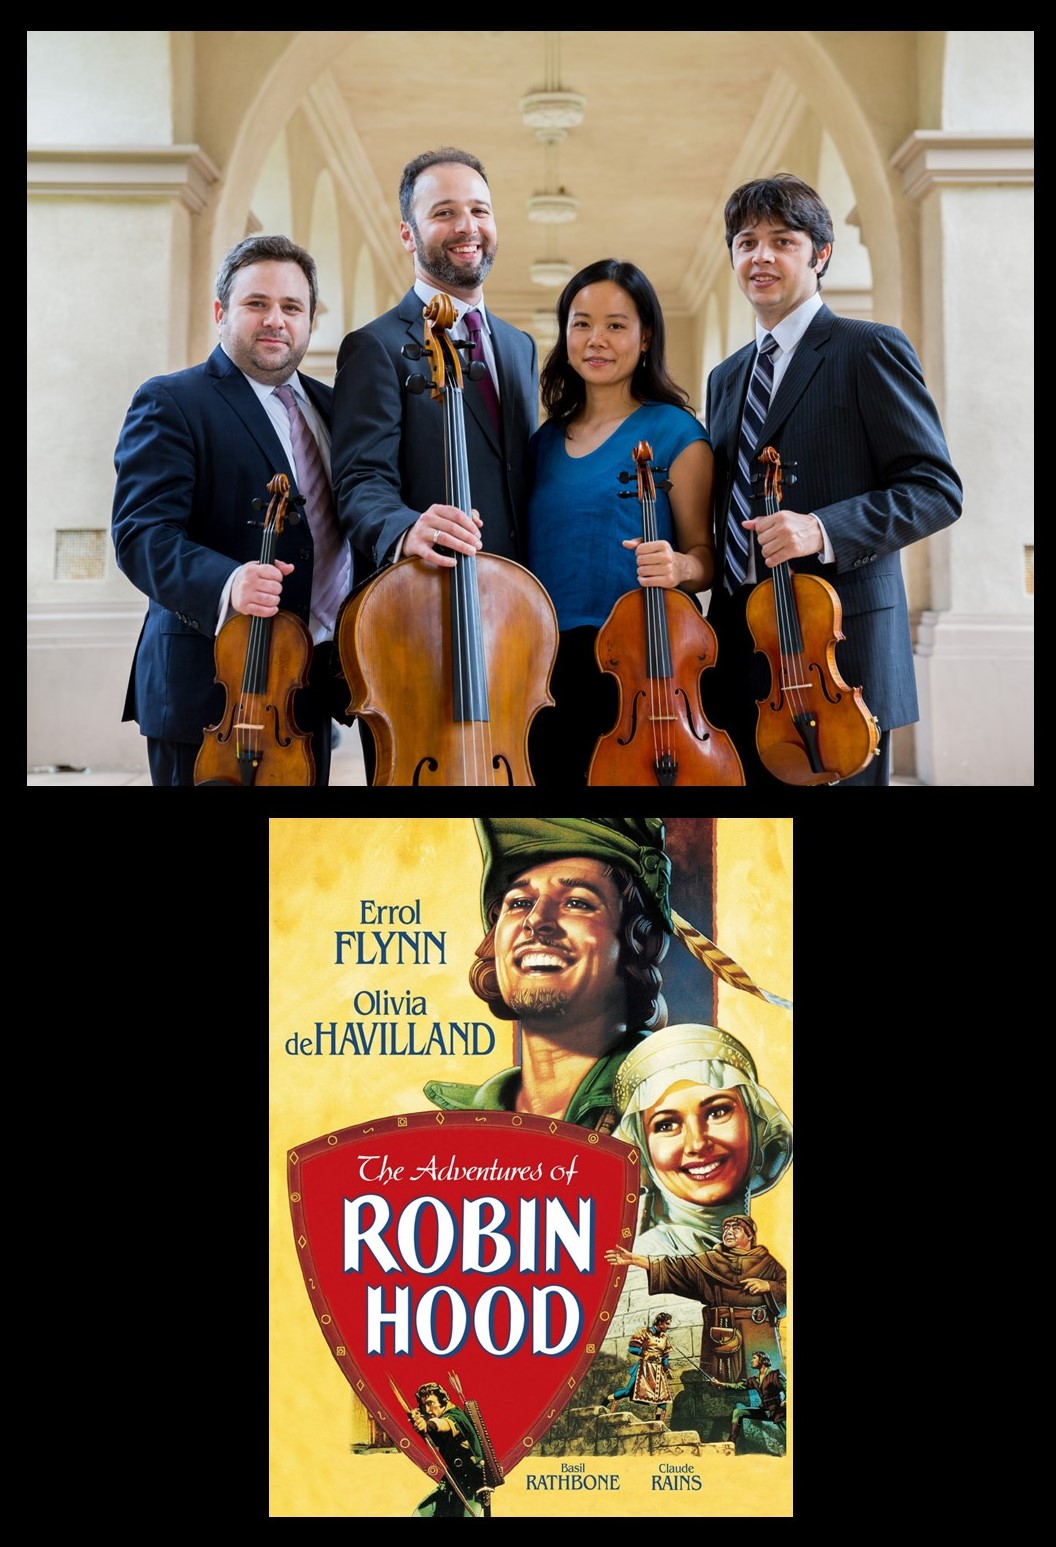 Photo of the Hausmann Quartet members holding instruments and The Adventures of Robin Hood movie poster